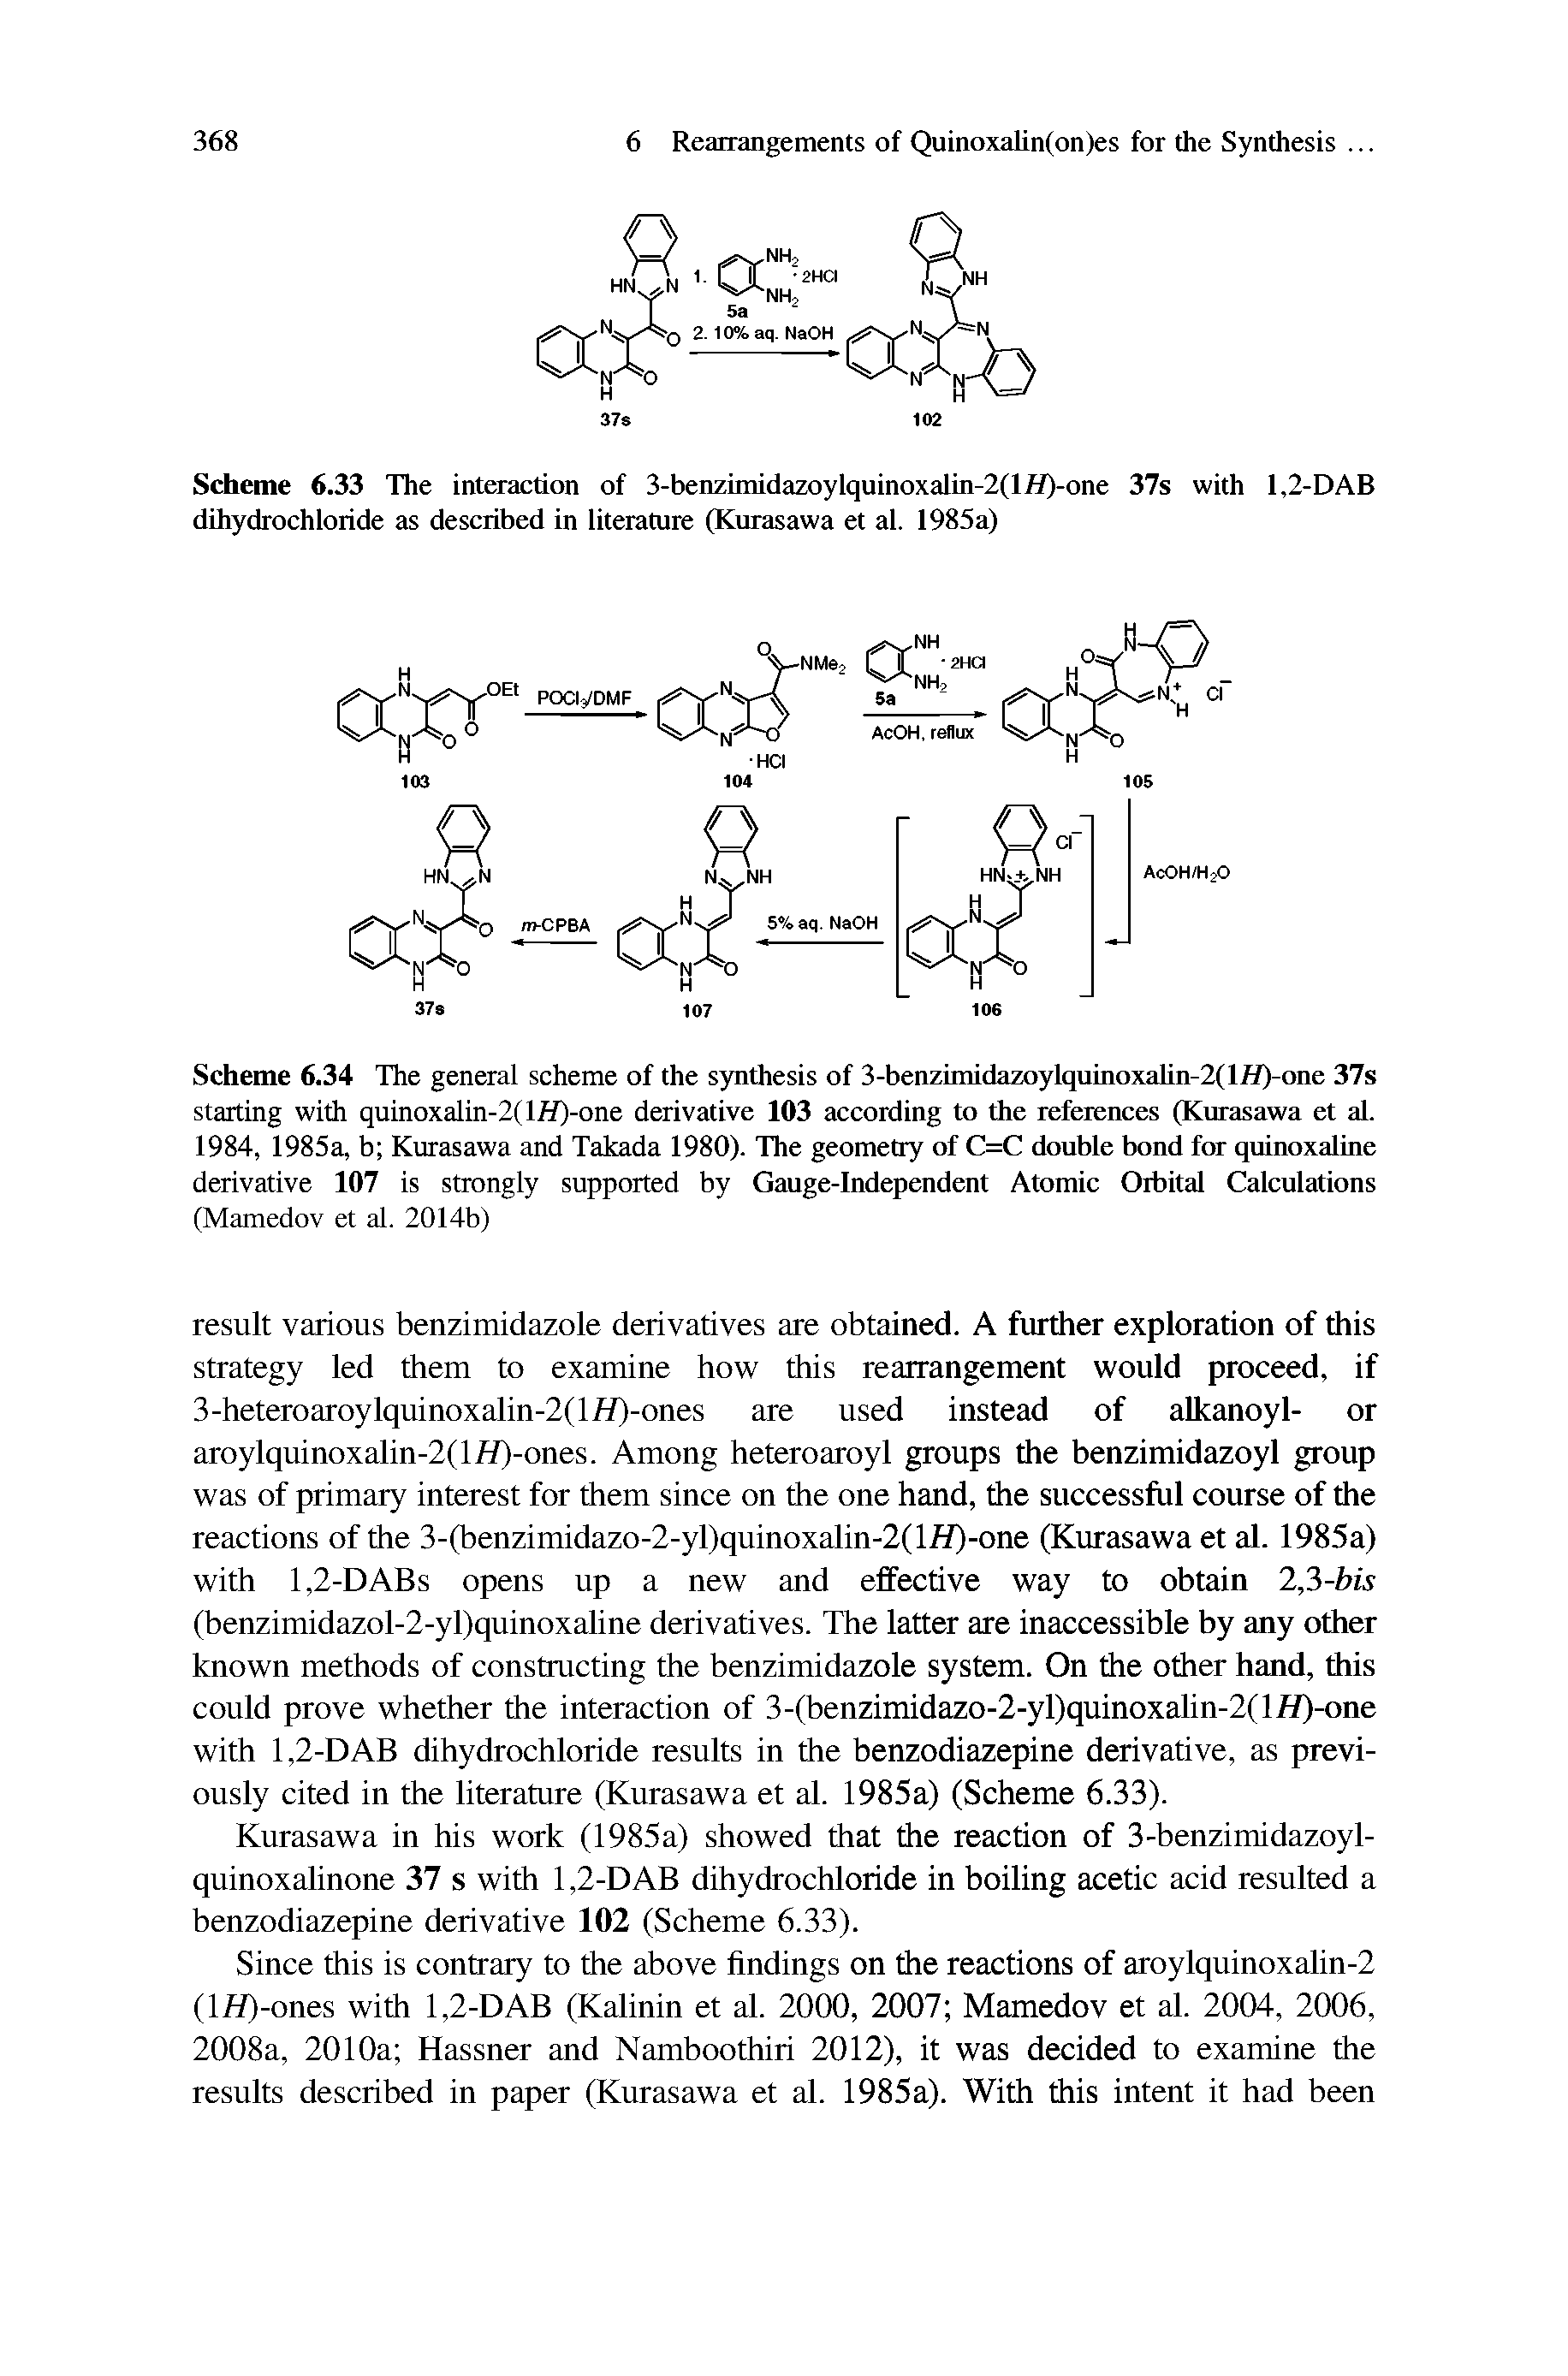 Scheme 6.34 The general scheme of the synthesis of 3-benzimidazoylquinoxalin-2(lfl)-one 37s starting with quinoxalin-2(l/f)"On6 derivative 103 according to the referenees (Kurasawa et aL 1984, 1985a, b Kurasawa and Takada 1980). The geometry of C=C double bond ftw quinoxaline derivative 107 is strongly supported by Gauge-Independent Atomic Orbital Calculations...